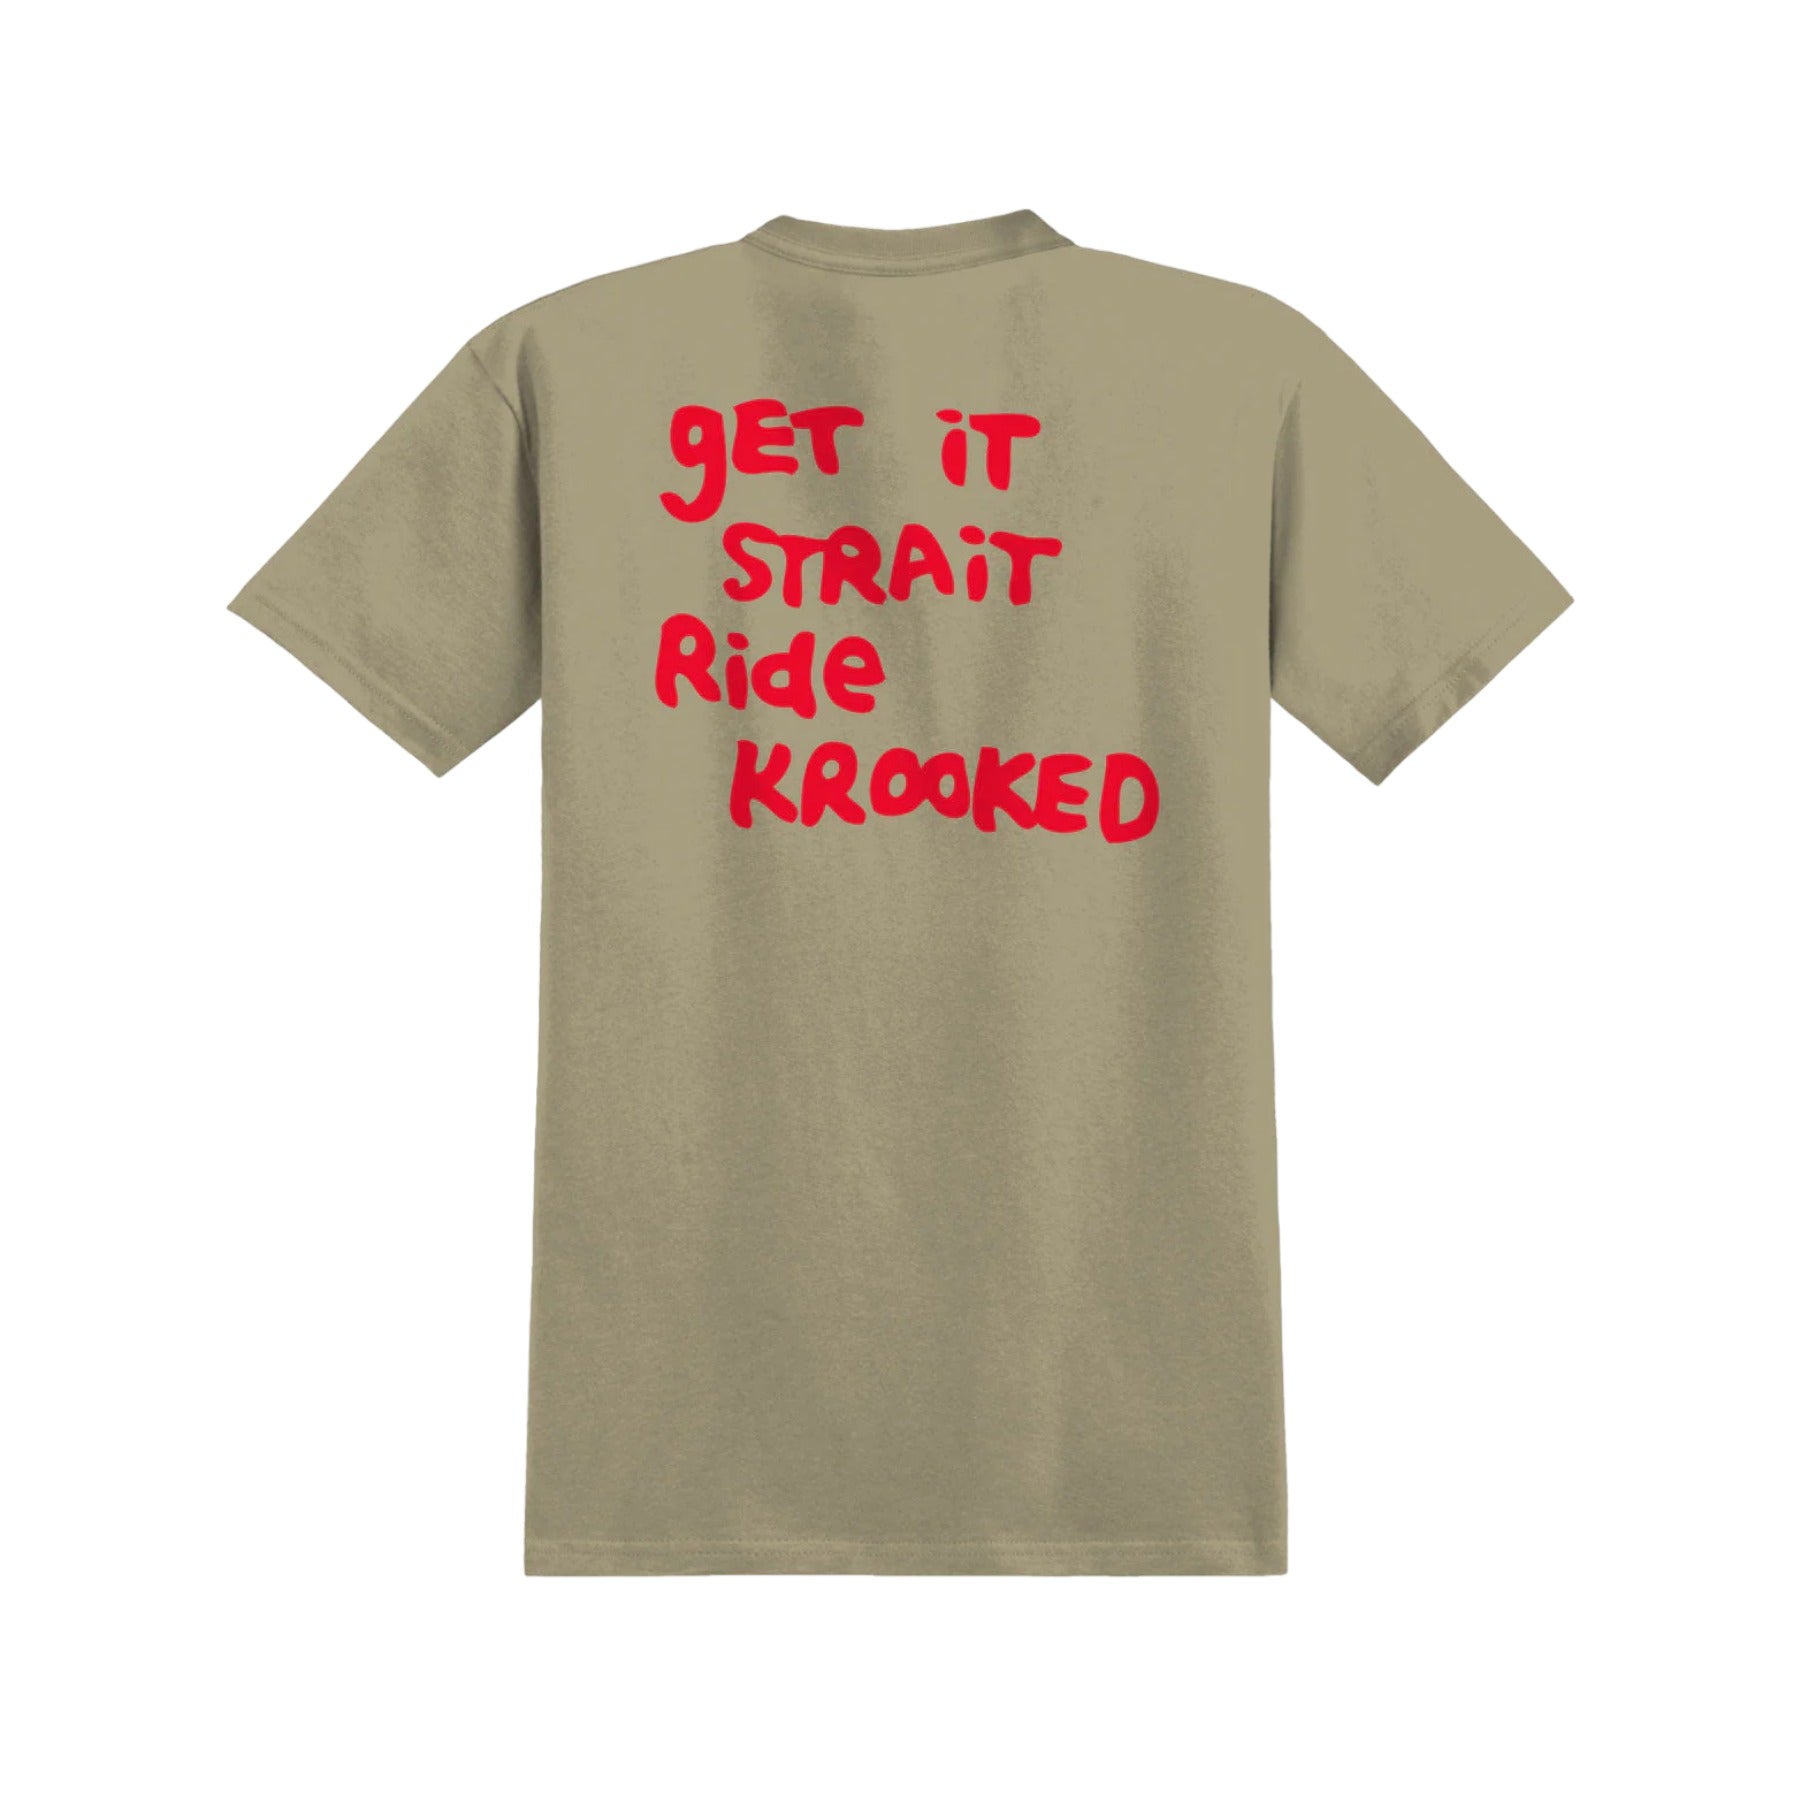 Krooked Straight Eyes S/S Tee - Sand/Red